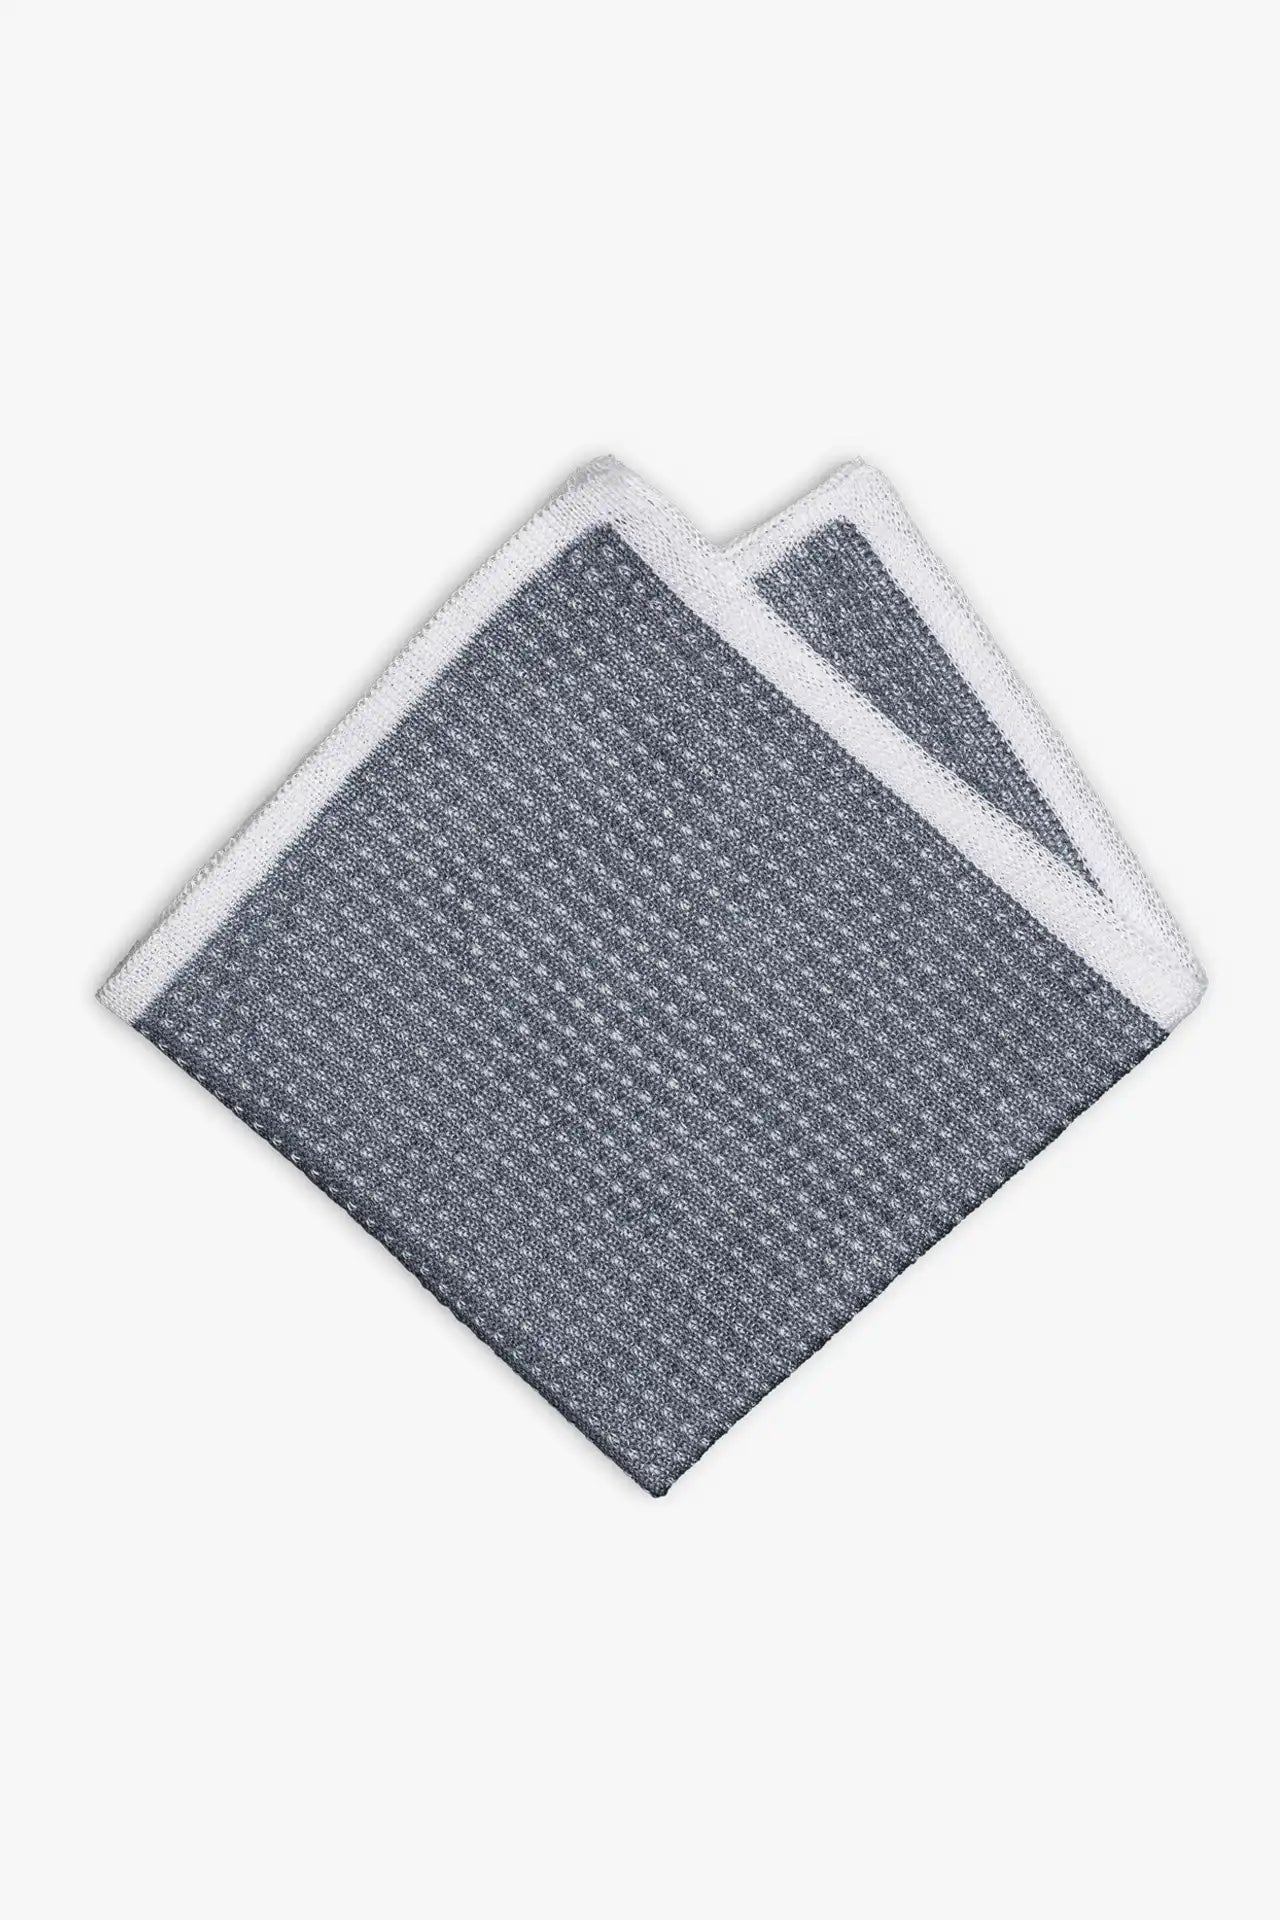 Blue and white knitted pocket square with white boarder in cotton 